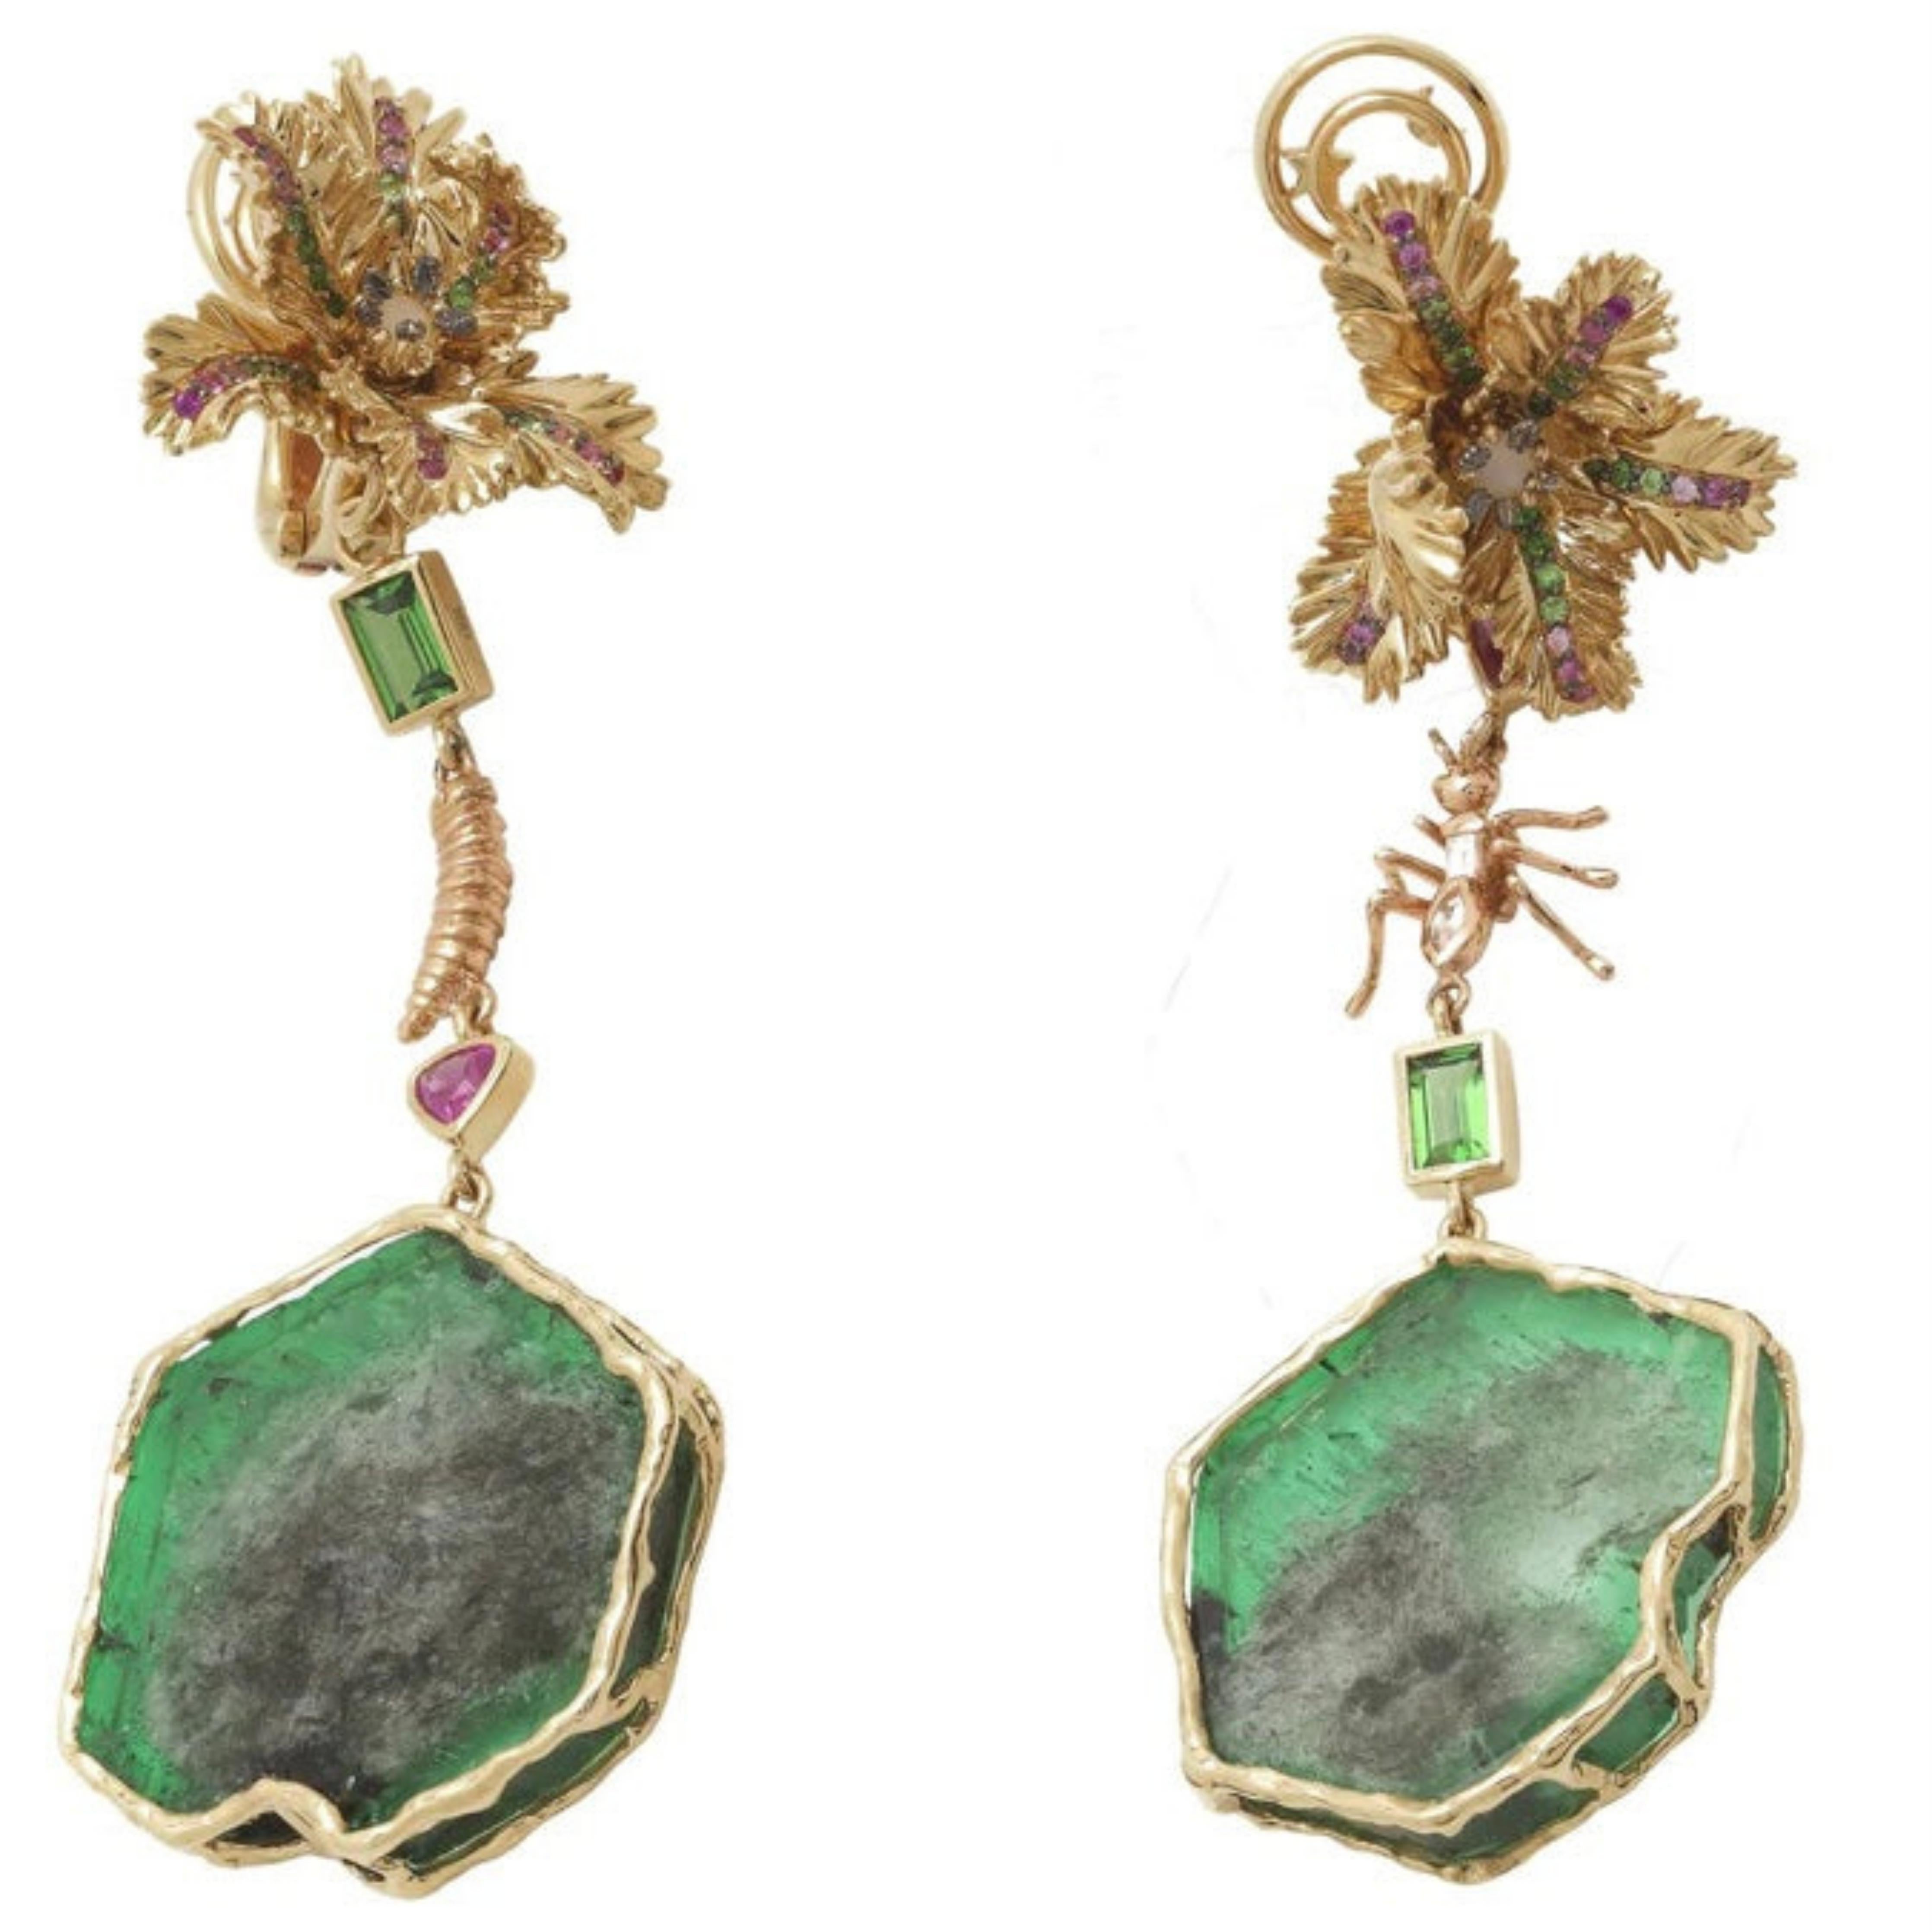 Bibi van der Velden Emerald Slice Earrings One-of-a-kind raw emerald slices set in 18K Yellow Gold flower studs set with pink sapphires, green tsavorites and an opal at the center. Each earring reveals unique details - one with a gold and diamond ant and the other with a rose gold maggot. The emerald slices can be removed to wear just the studs. Shown from the front view.